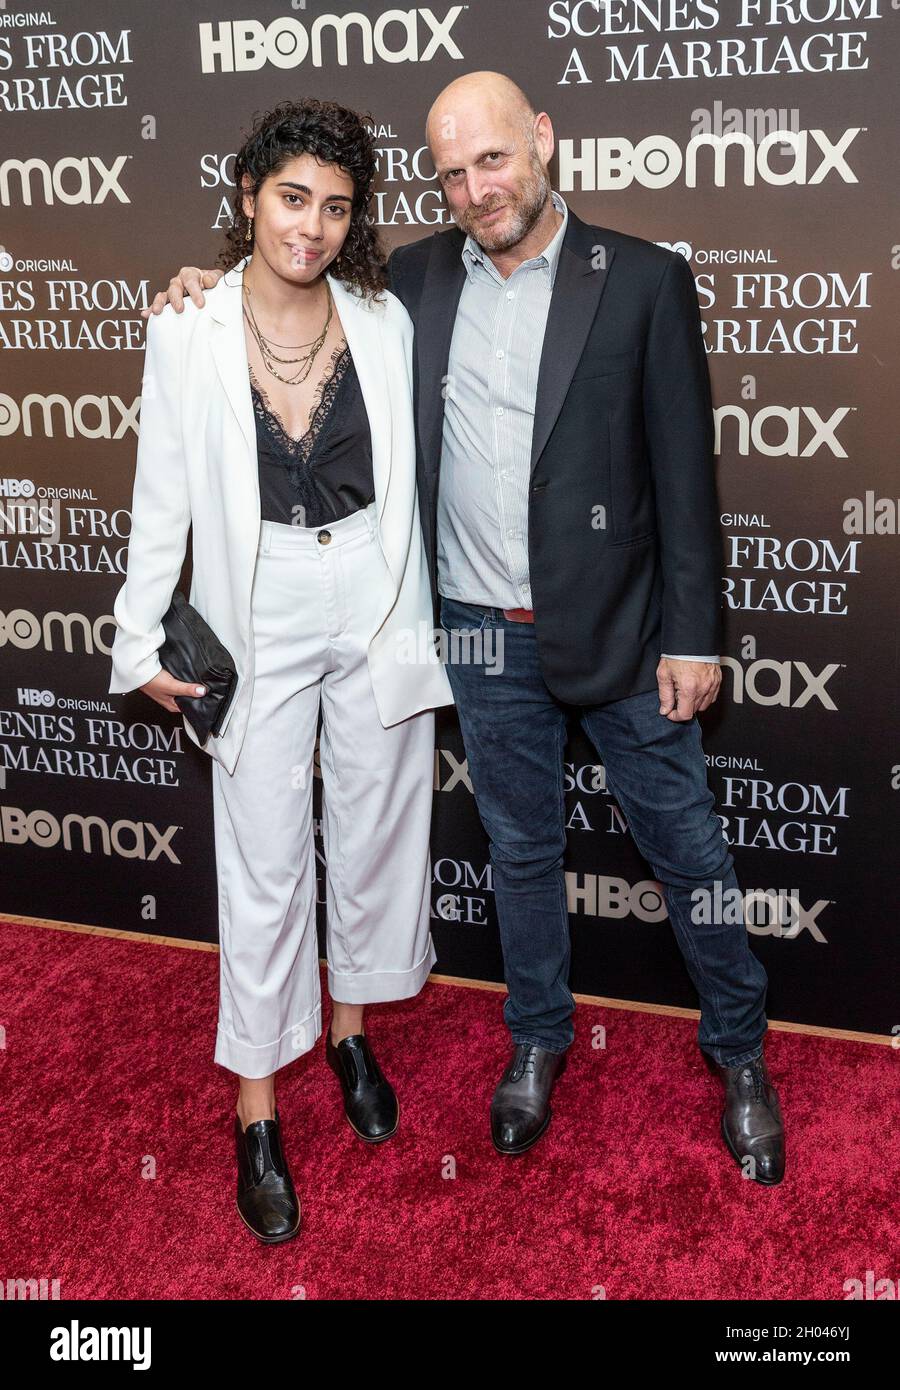 New York, United States. 10th Oct, 2021. Director Hagai Levi (R) attends screening of HBO Scenes From A Marriage at Museum of Modern Art (Photo by Lev Radin/Pacific Press) Credit: Pacific Press Media Production Corp./Alamy Live News Stock Photo